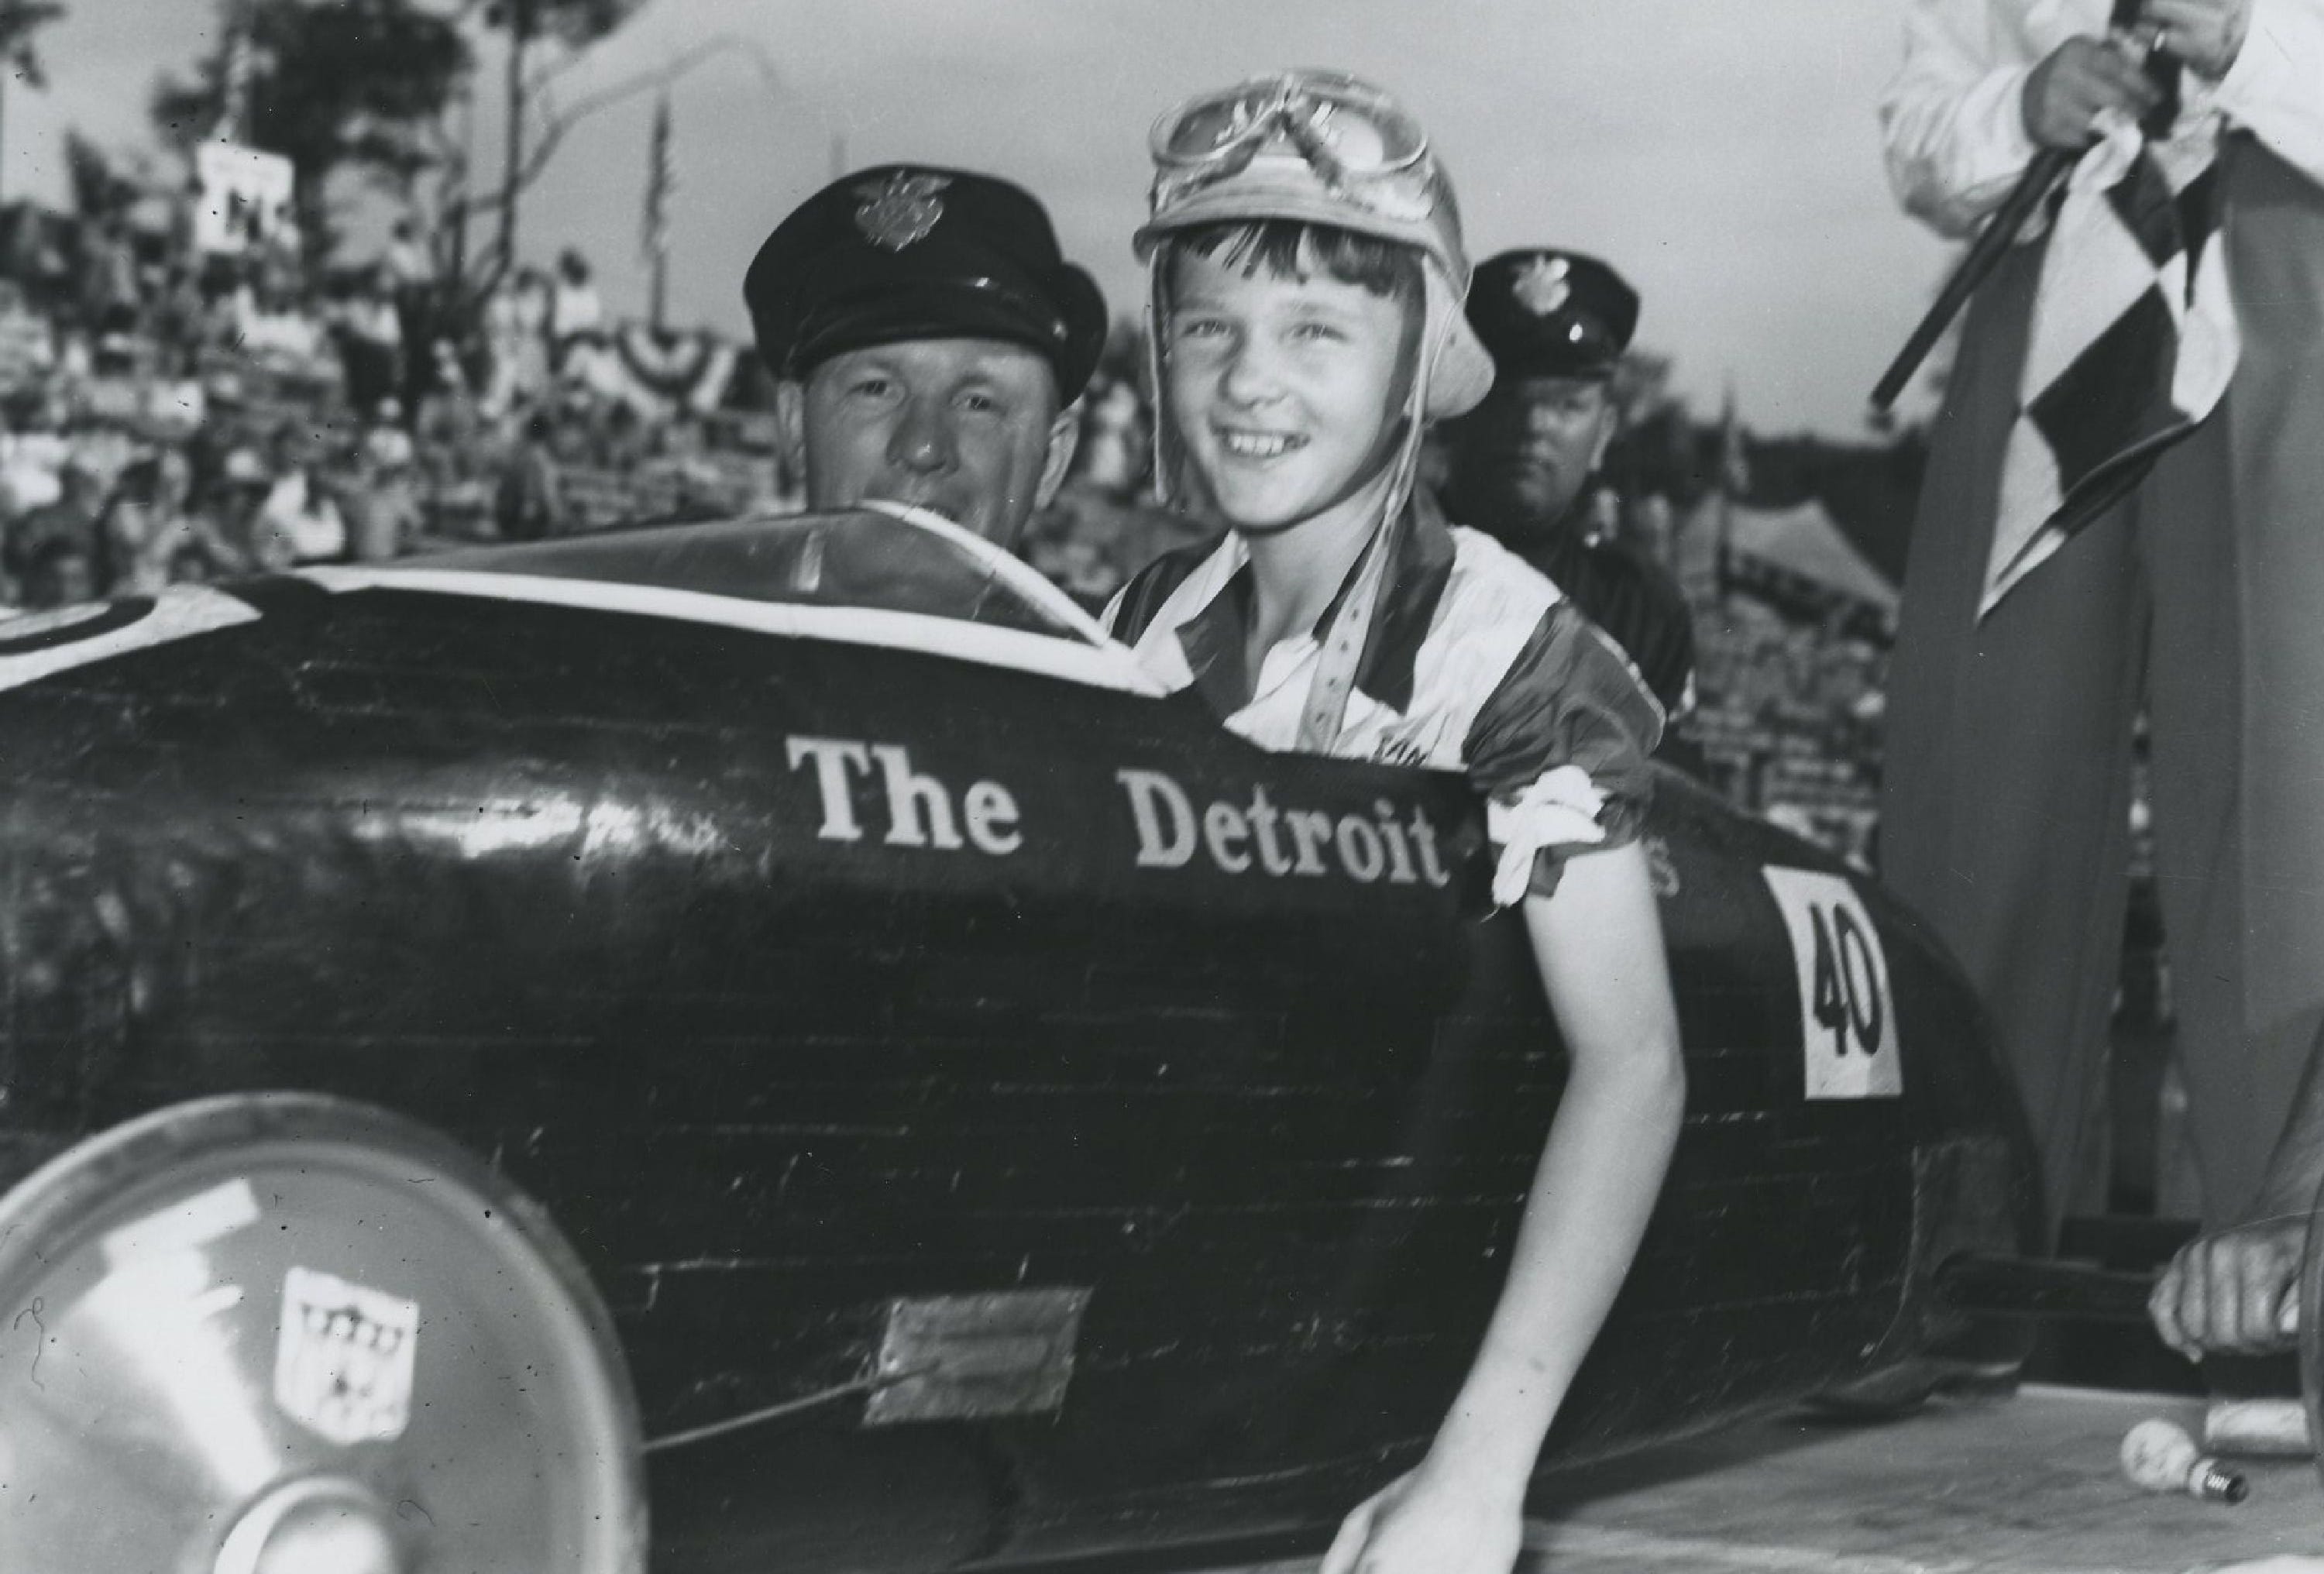 Tommy Fisher was the 1940 Detroit Soap Box Derby Champ.